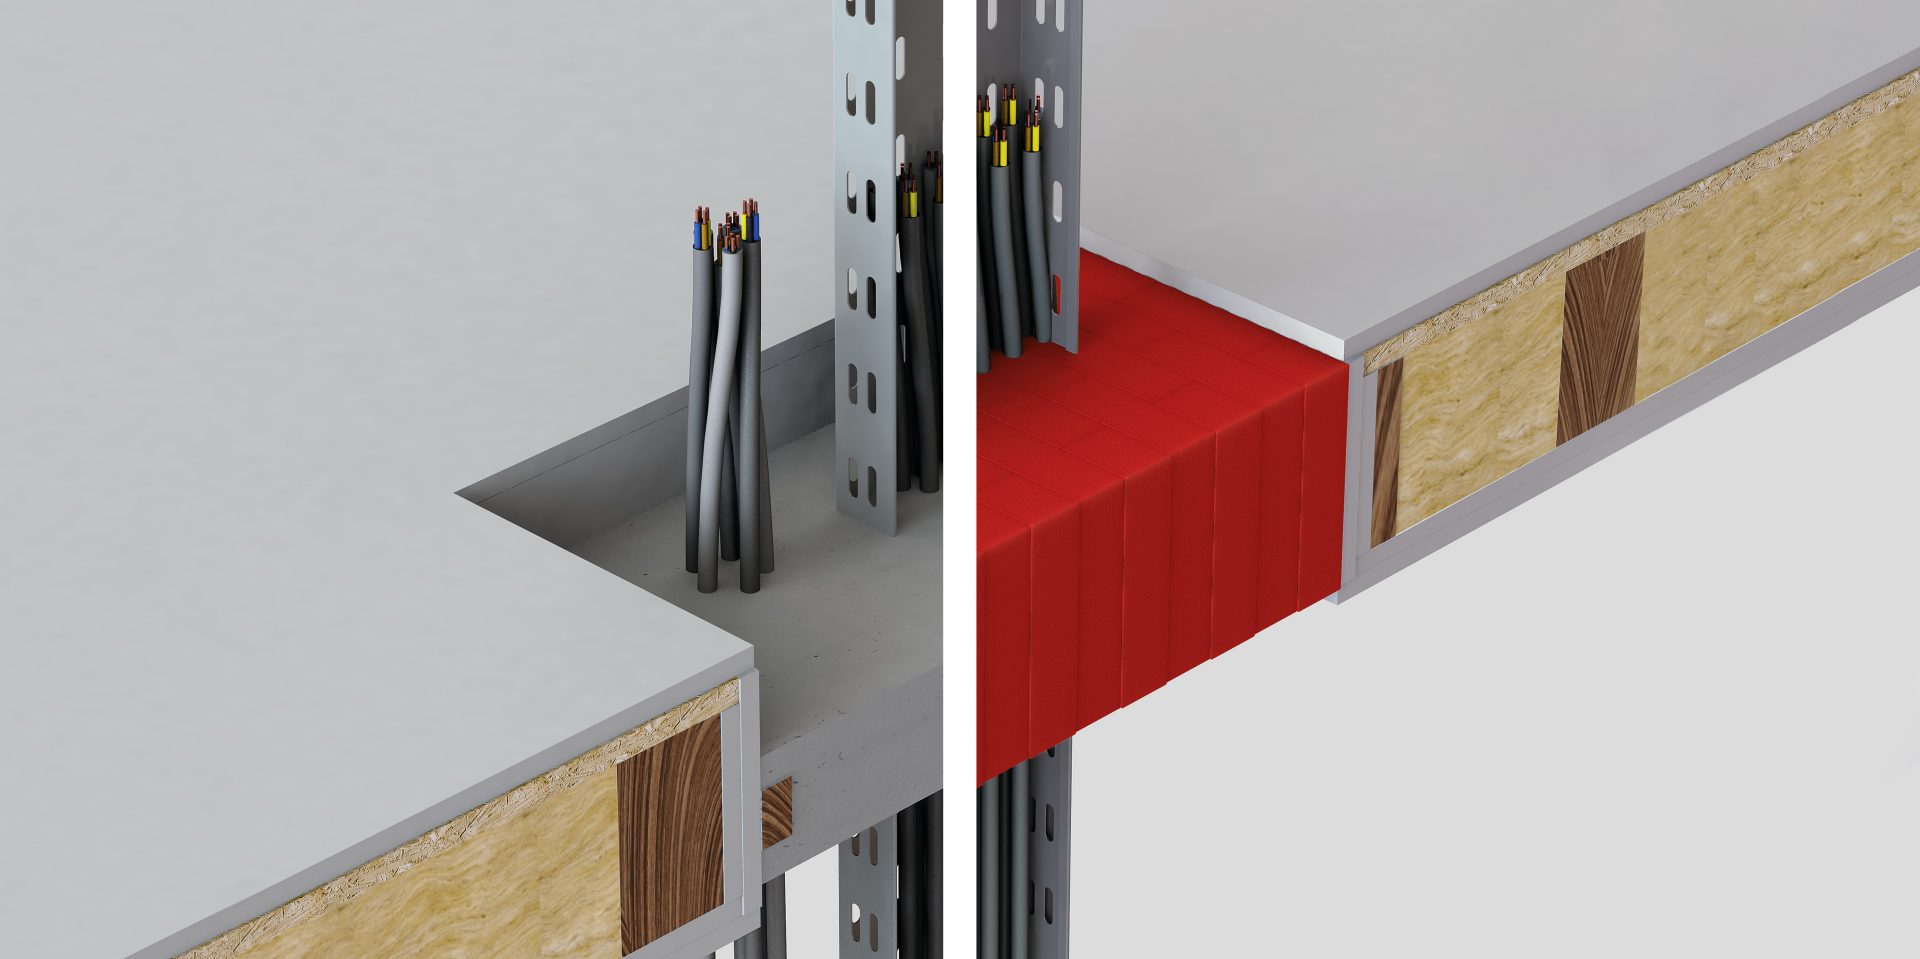 3D rendering showing a comparison of a traditional mortar solution (on the left) and dry Hilti firestop blocks  in red (on the right) through a timber floor